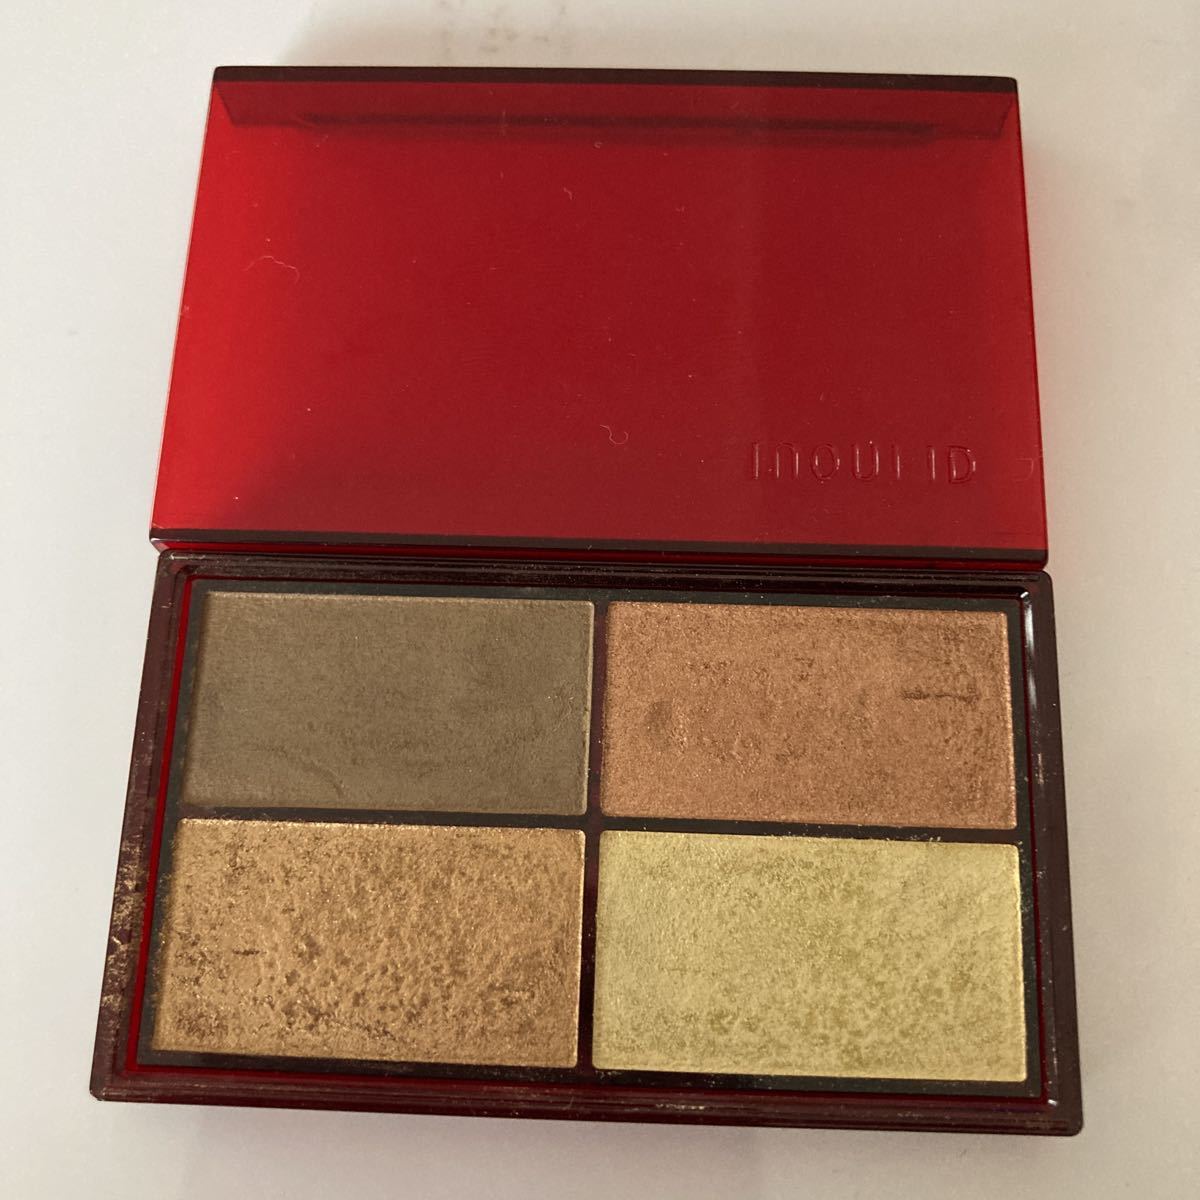  in ui* I ti-*6* eyeshadow * I color * Brown gold group * regular price 3300 jpy 